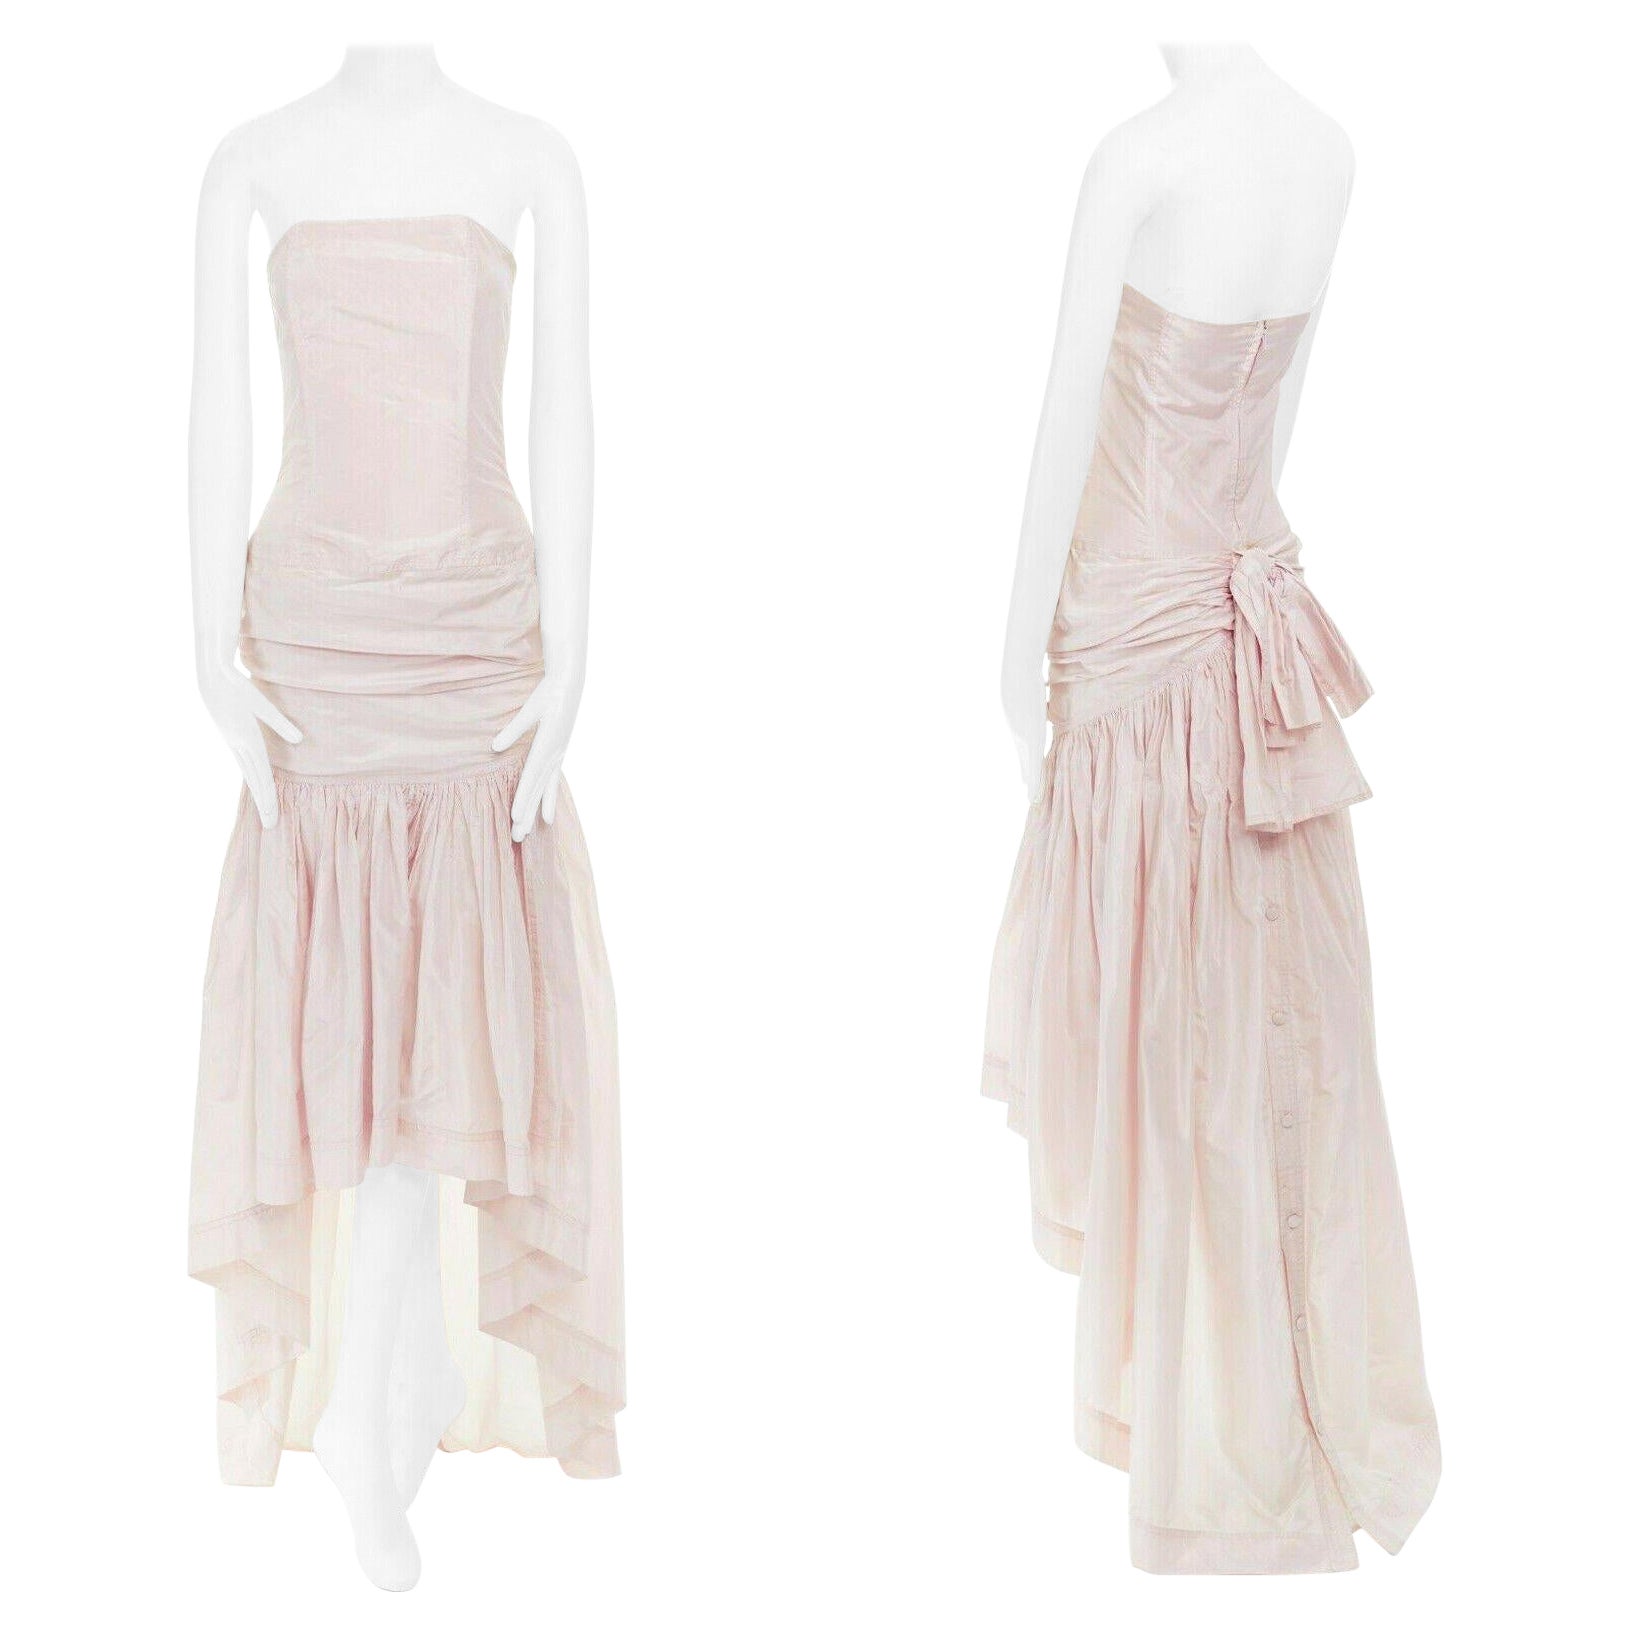 ANGELO TARLAZZI light pink boned corset strapless ruched bow back high low dress